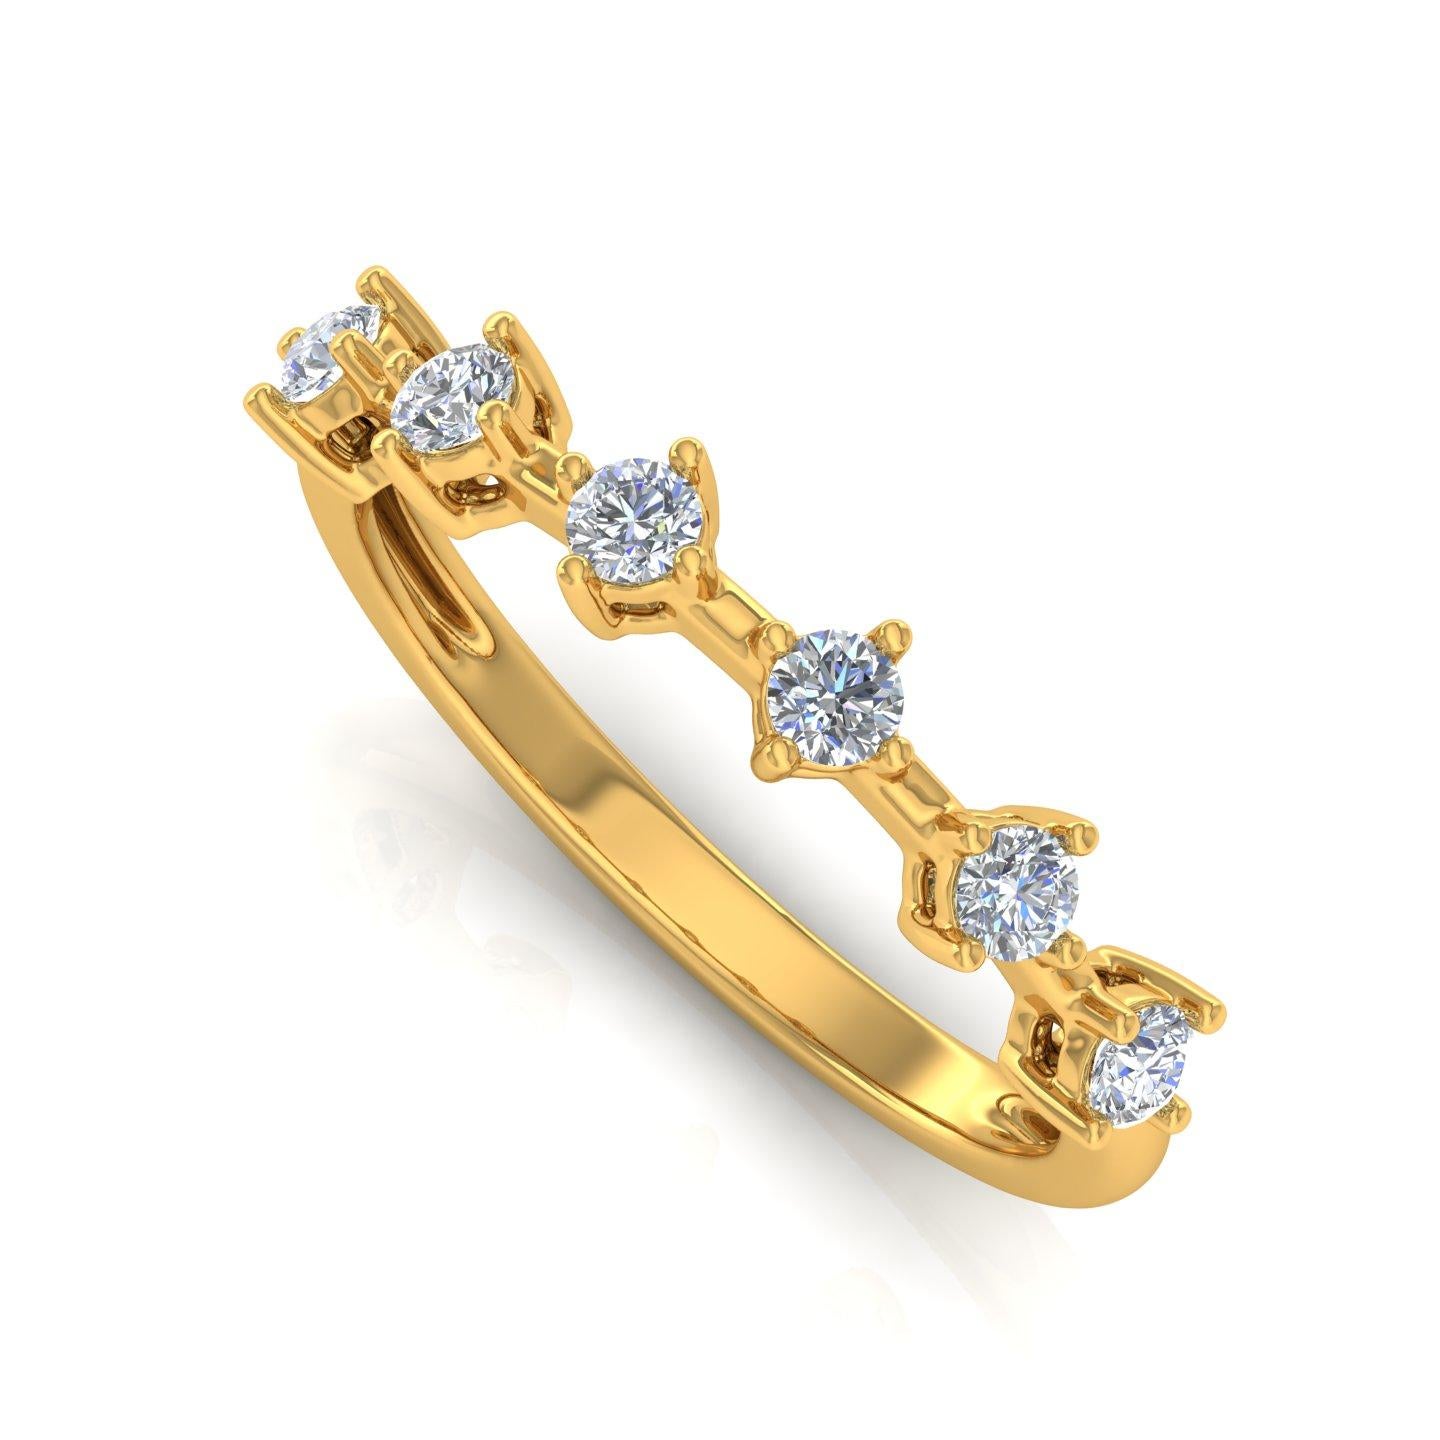 For Sale:  0.45 Carat SI Clarity HI Color Diamond Band Ring Solid 18k Yellow Gold Jewelry 8